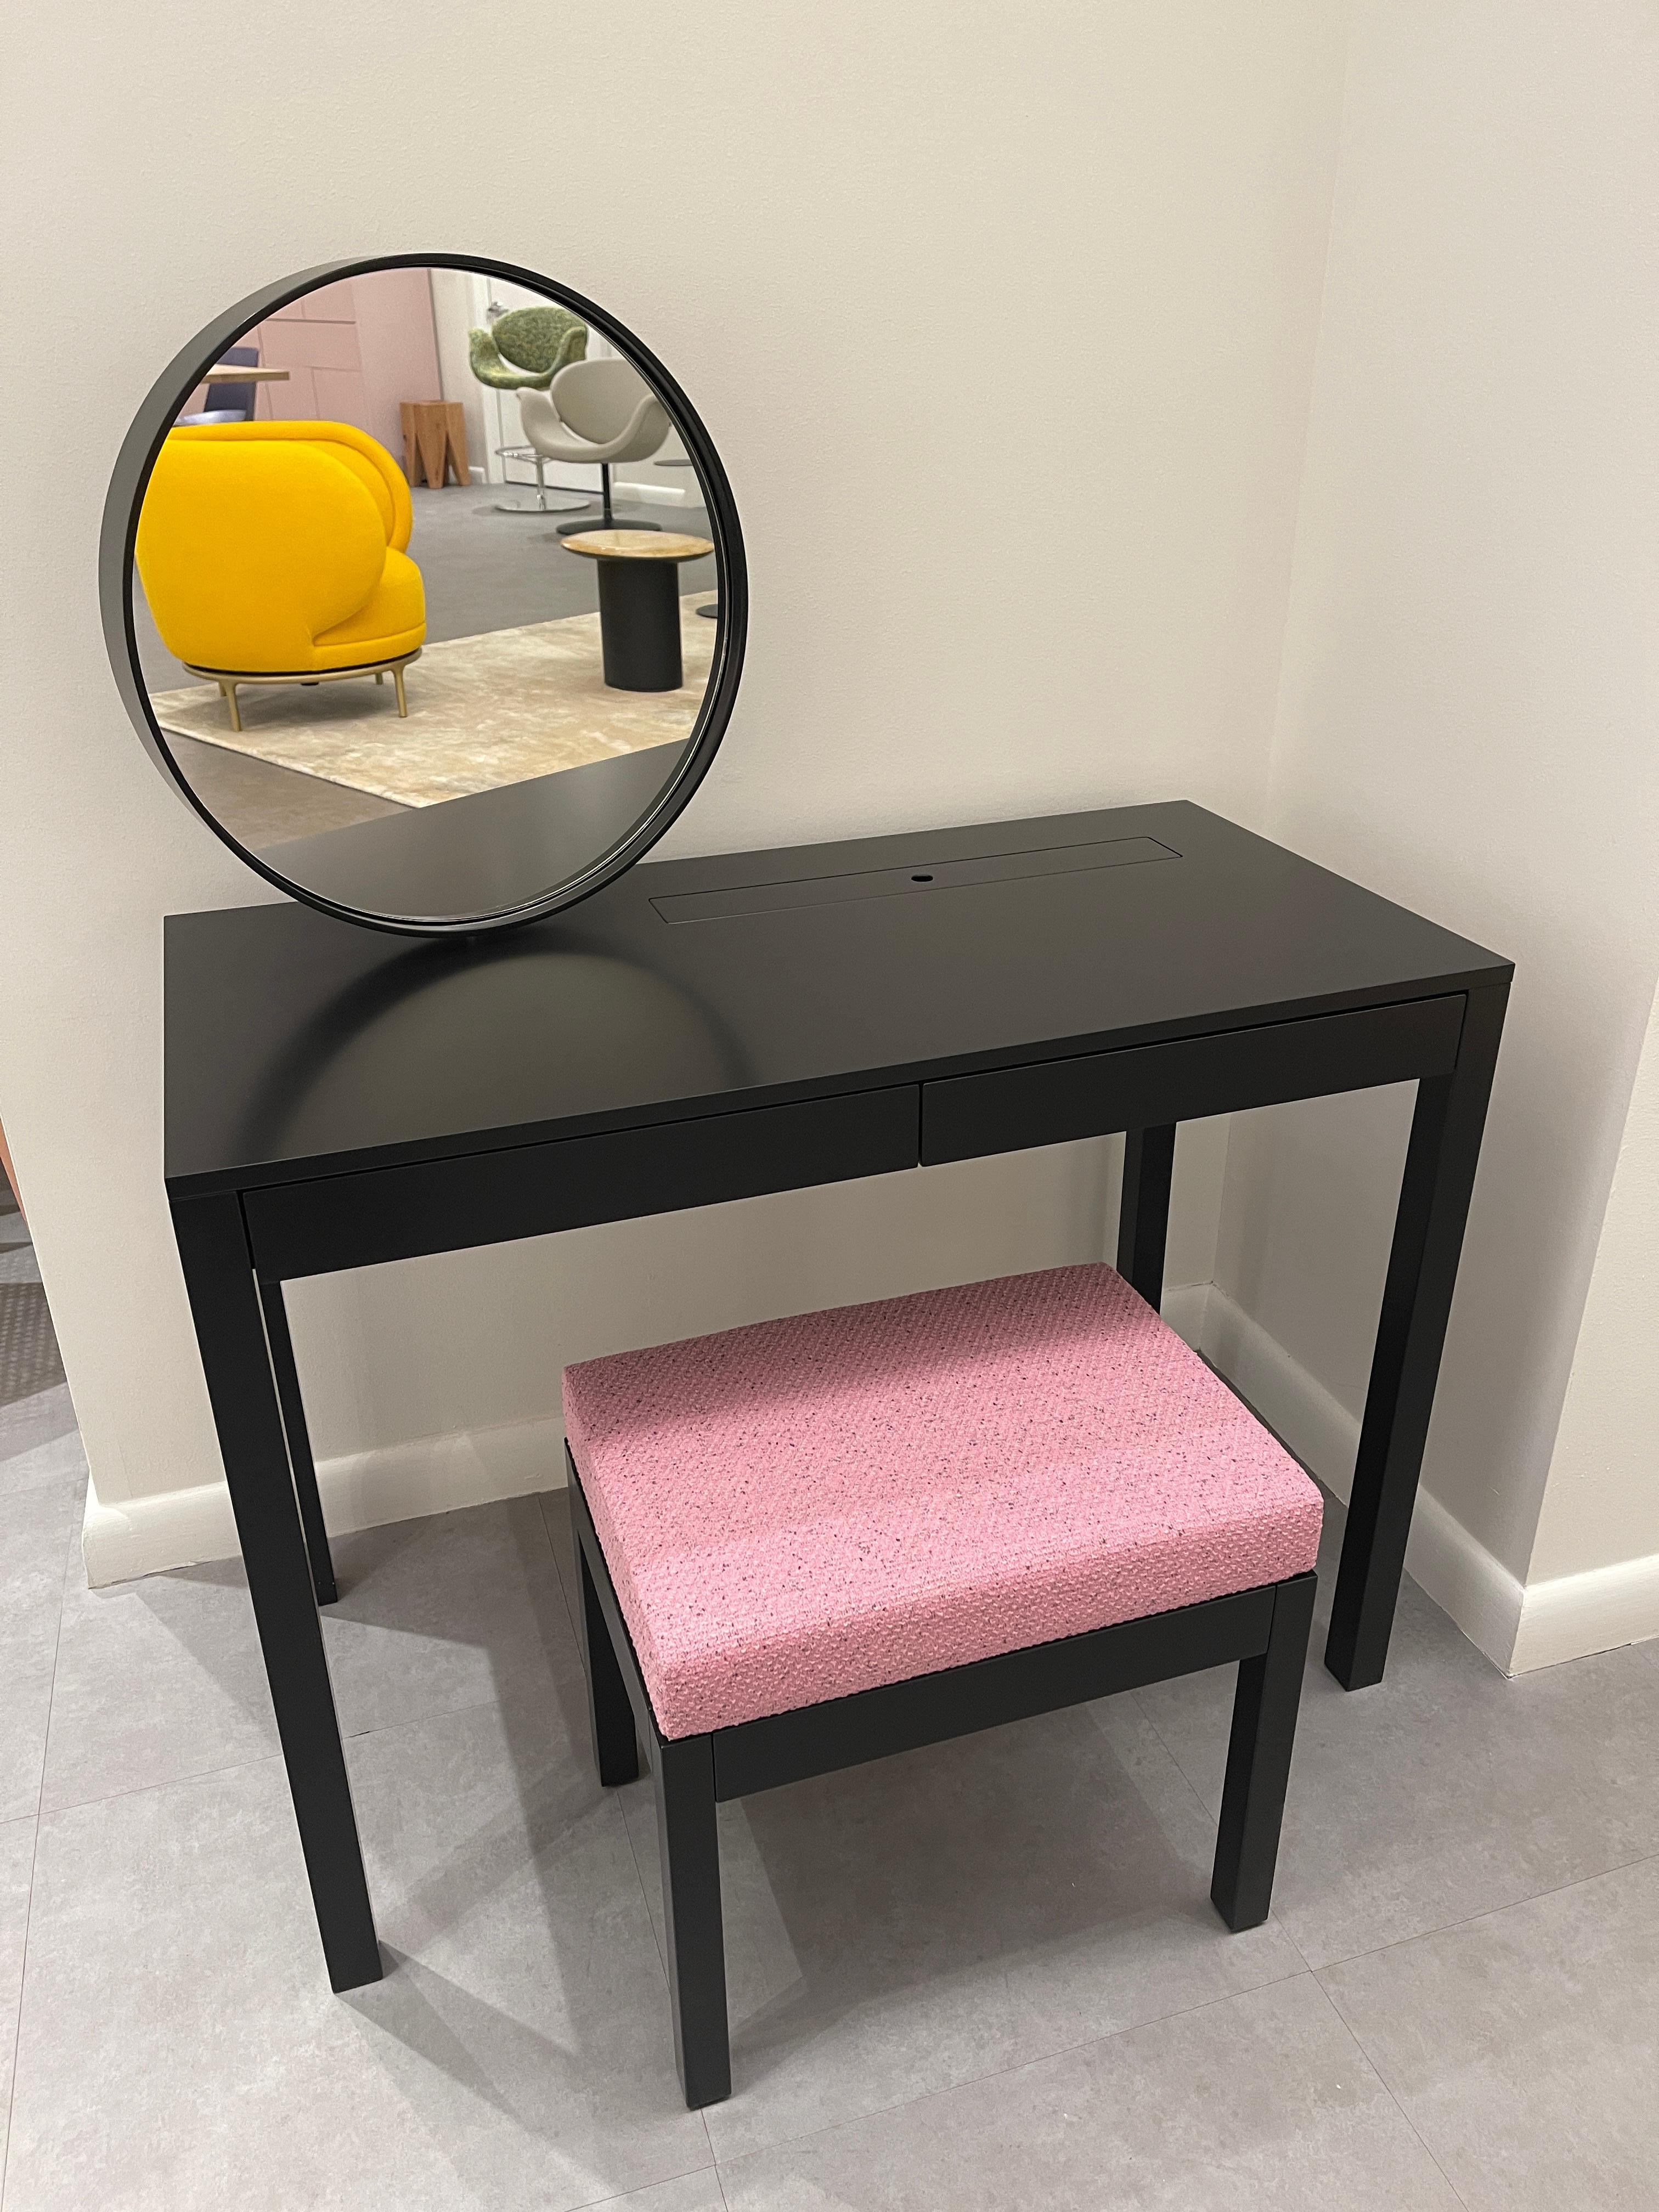 Contemporary Schonbuch Sphere Make-up Table with mirror Designed by Martha Schwindling STOCK